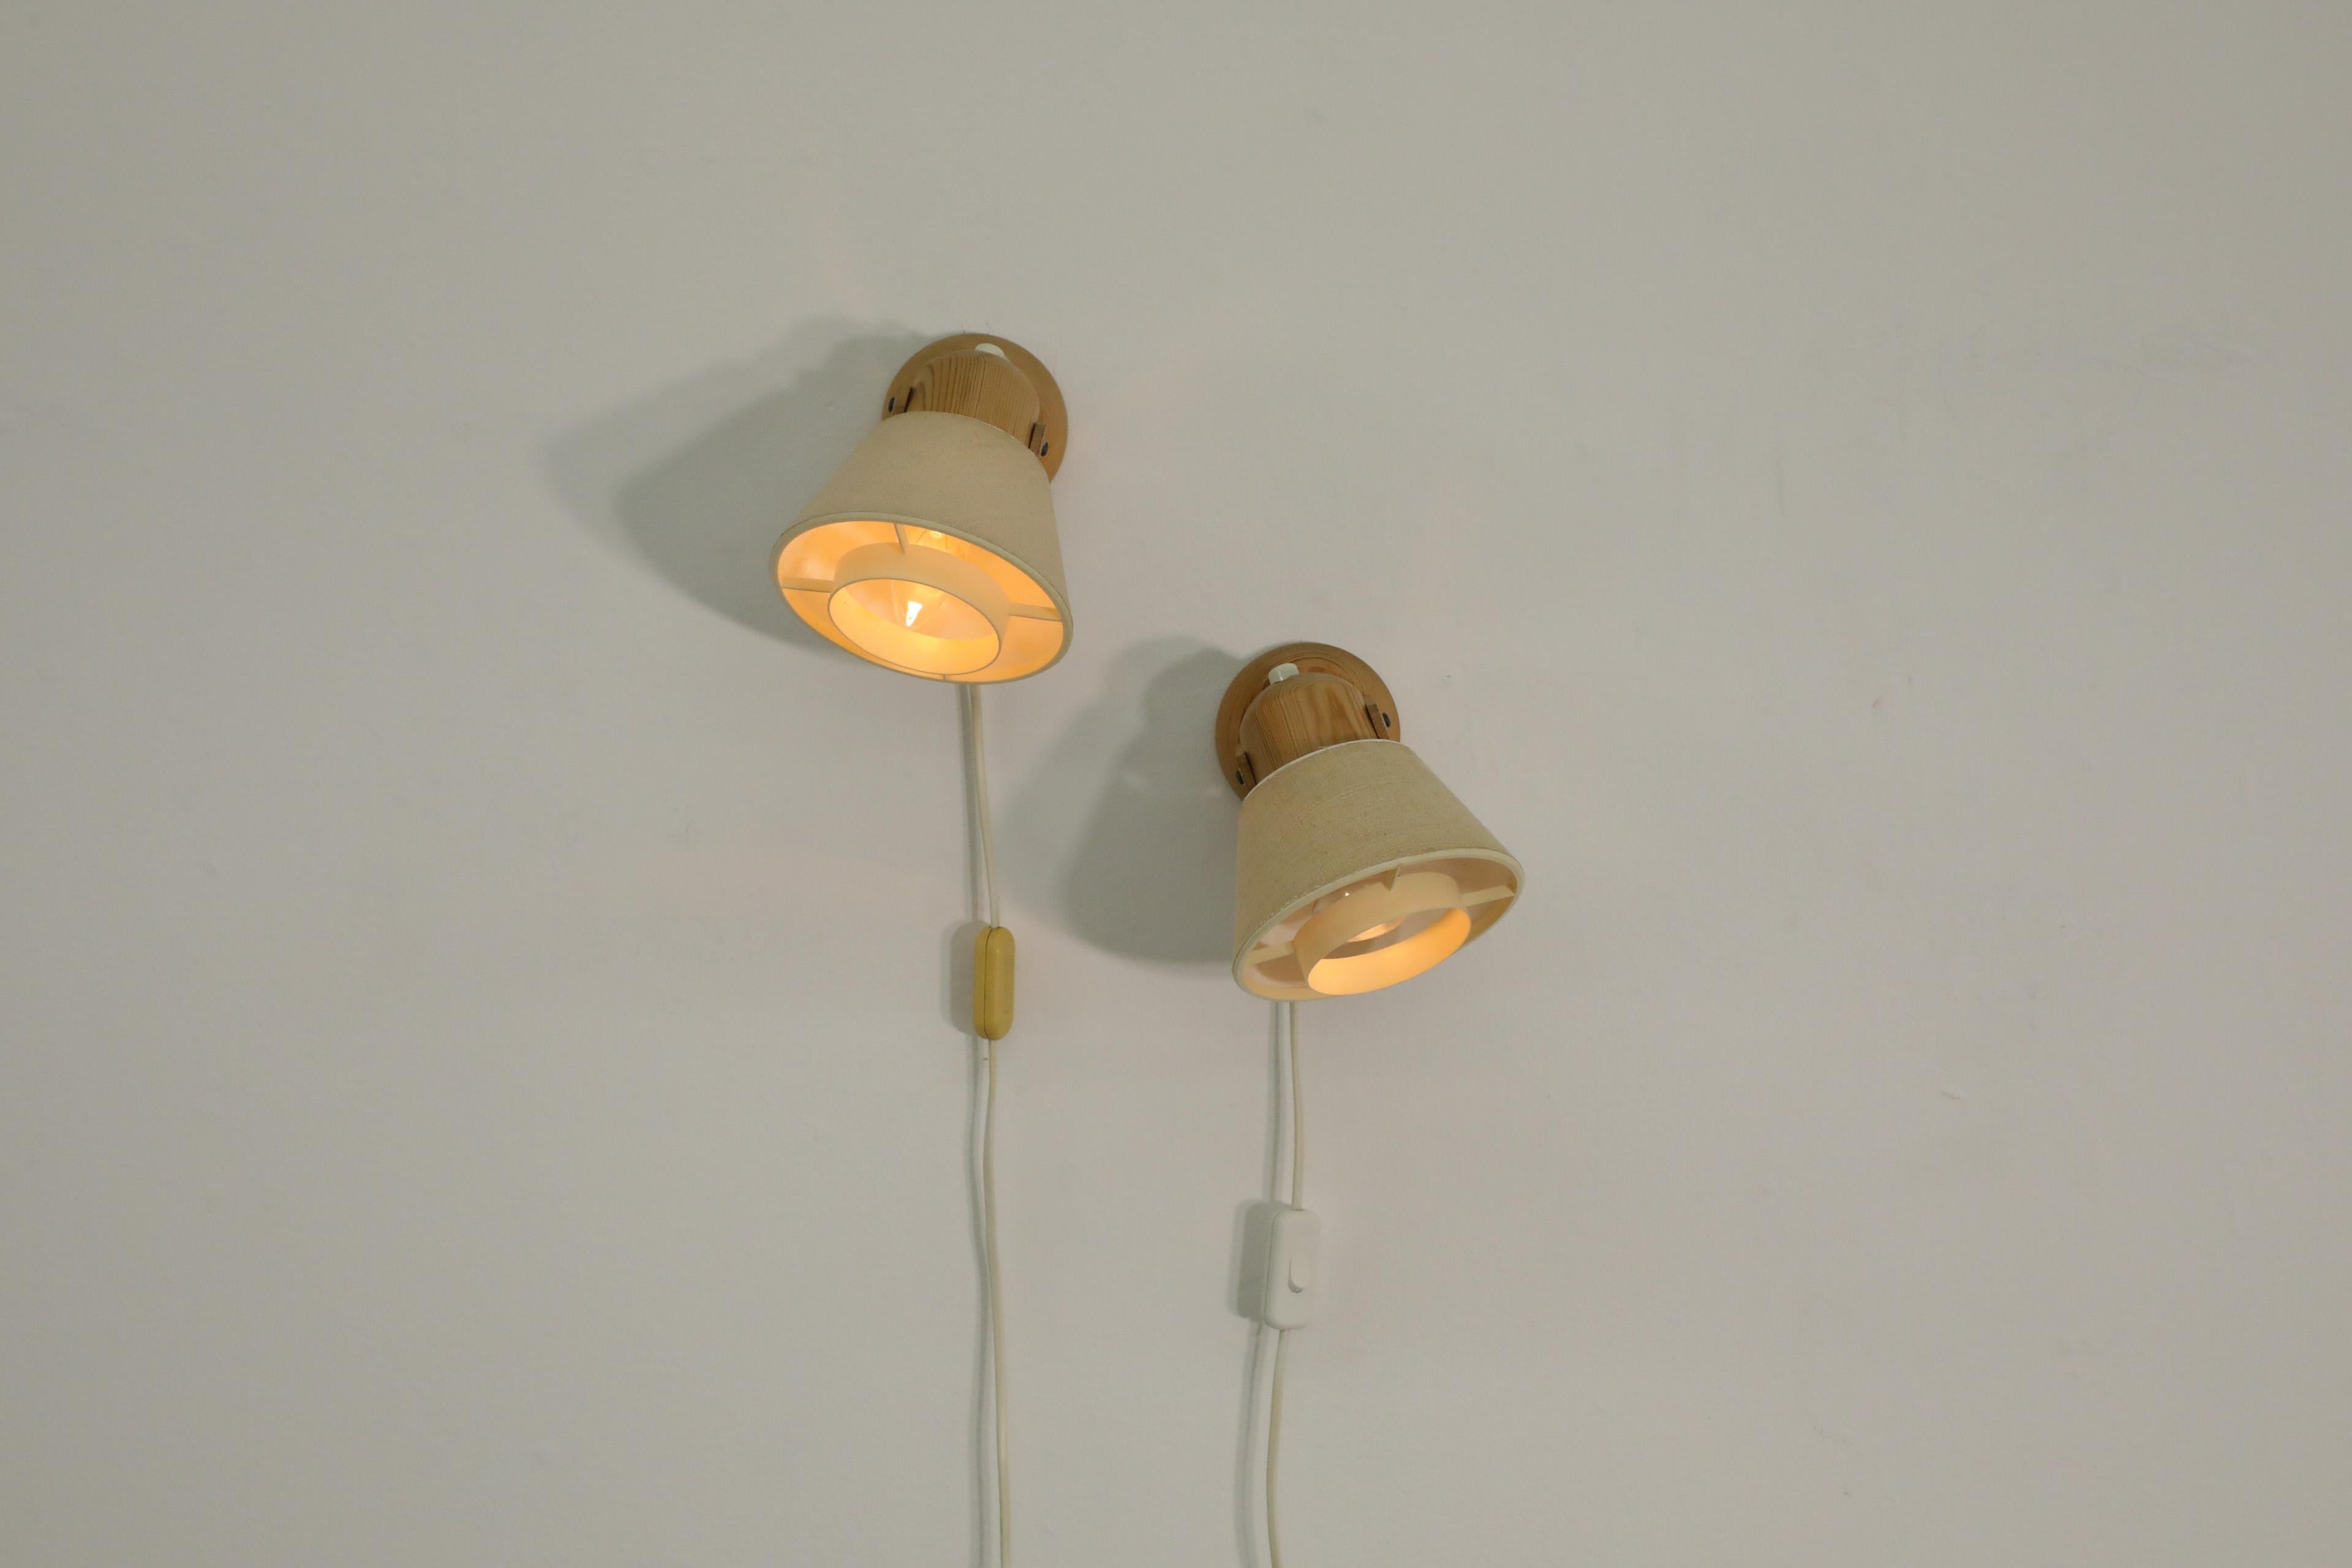 Pair of Mid-Century pine sconces with textured beige fabric shades by Swedish manufacturer AB Solbackens Svarveri, 1970s. Matching pair with spot sconces that can be coupled or styled separately for directional ambient lighting. In overall original